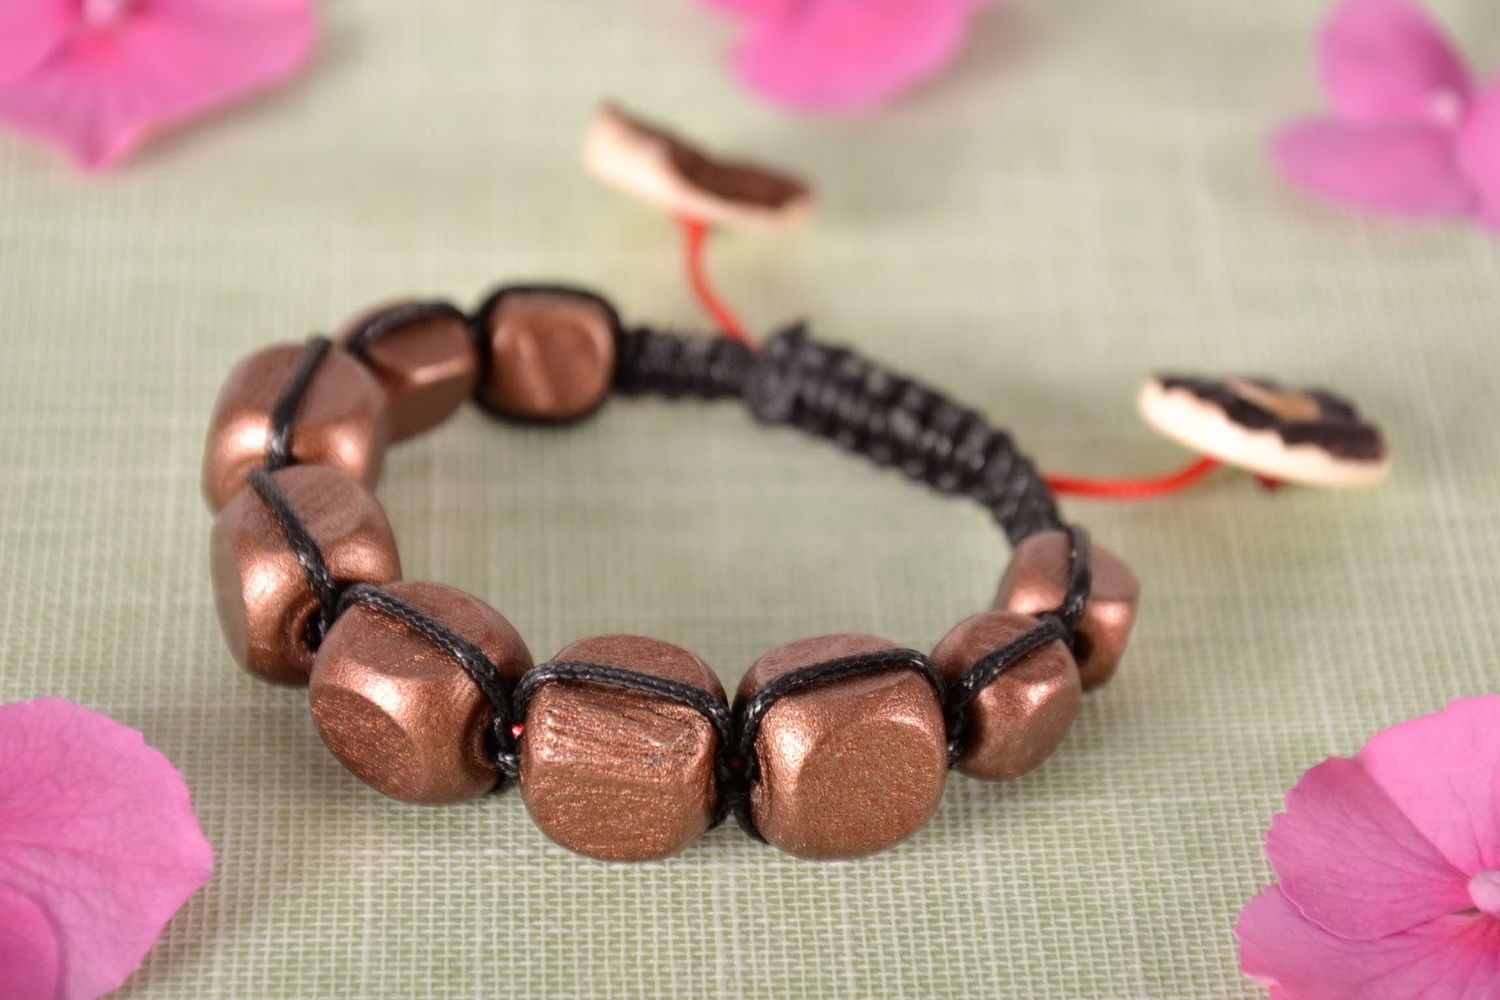 Bracelet made of wooden beads and plastic buttons photo 2